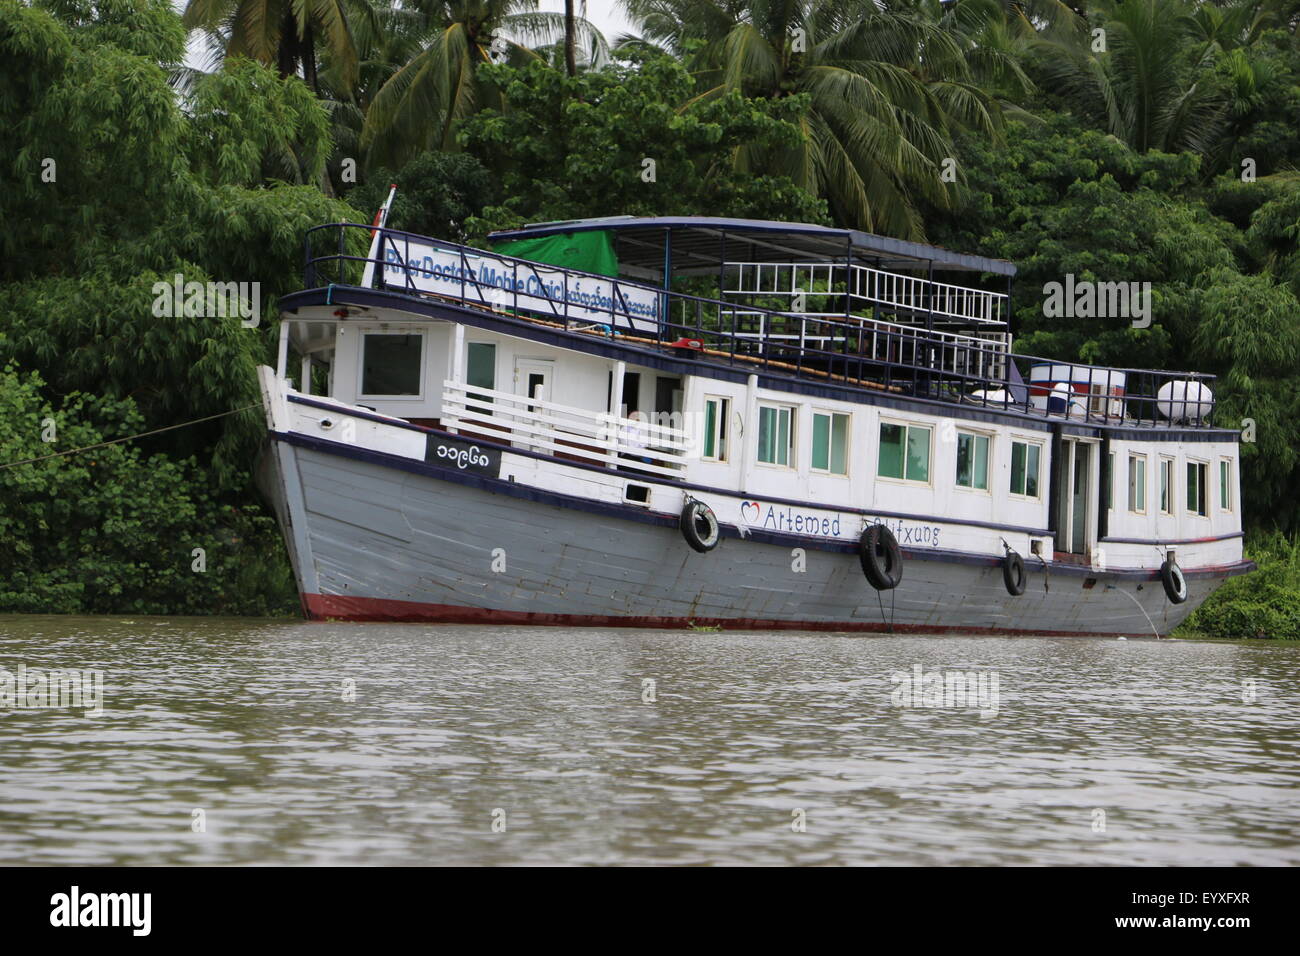 The doctor's ship in the Irrawaddy-Delta in Myanmar, 17 June 2015. There is much need for medical facilities in Myanmar following flooding. After cyclone Nargis, German money has funded a doctor's ship there. PHOTO: VERENA HOELZL/DPA Stock Photo